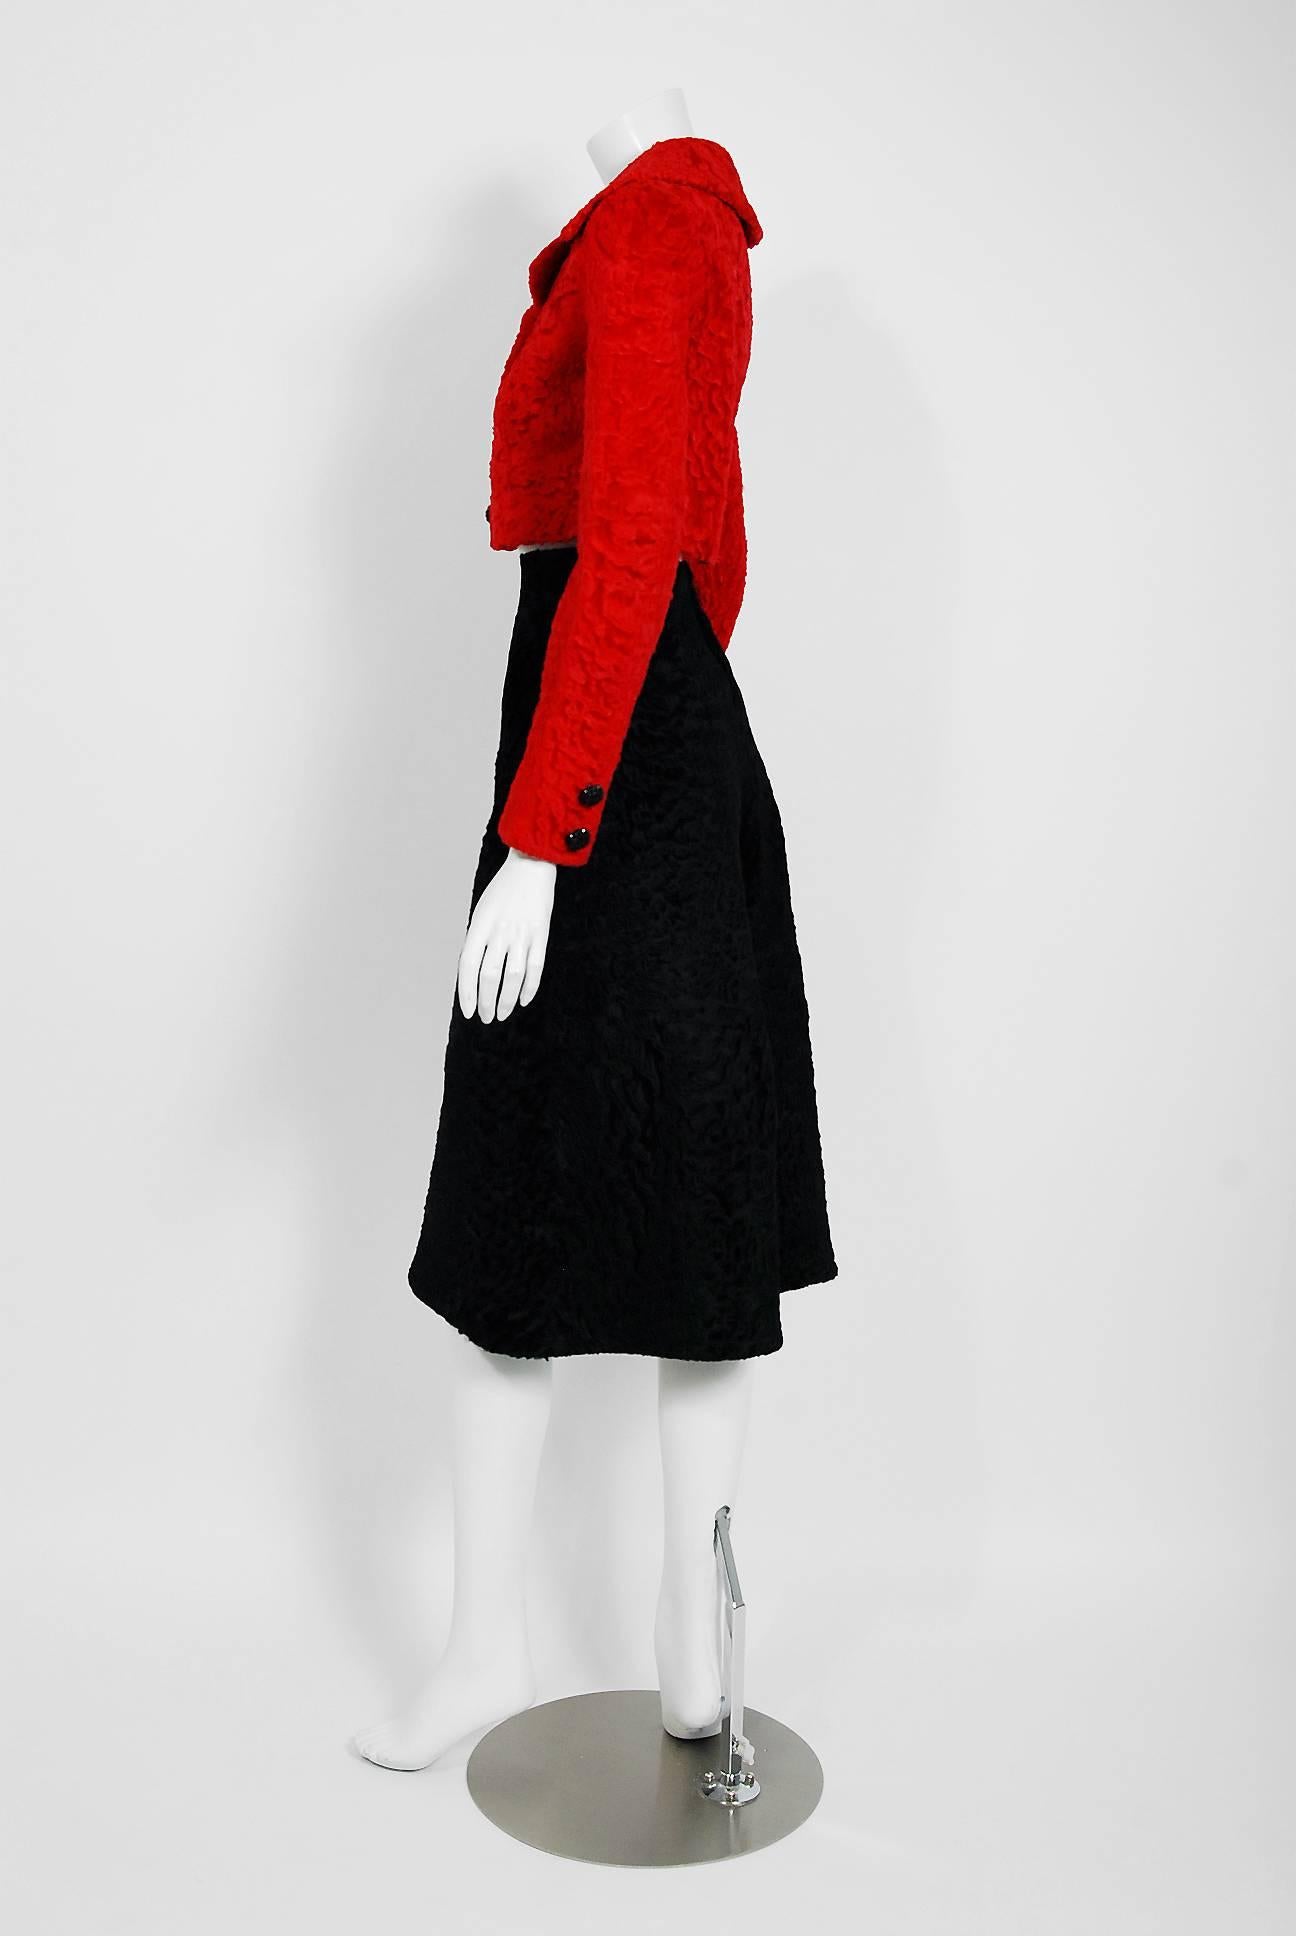 Vintage 1960s Christian Dior Couture Red Black Broadtail Jacket and Gaucho Pants 1